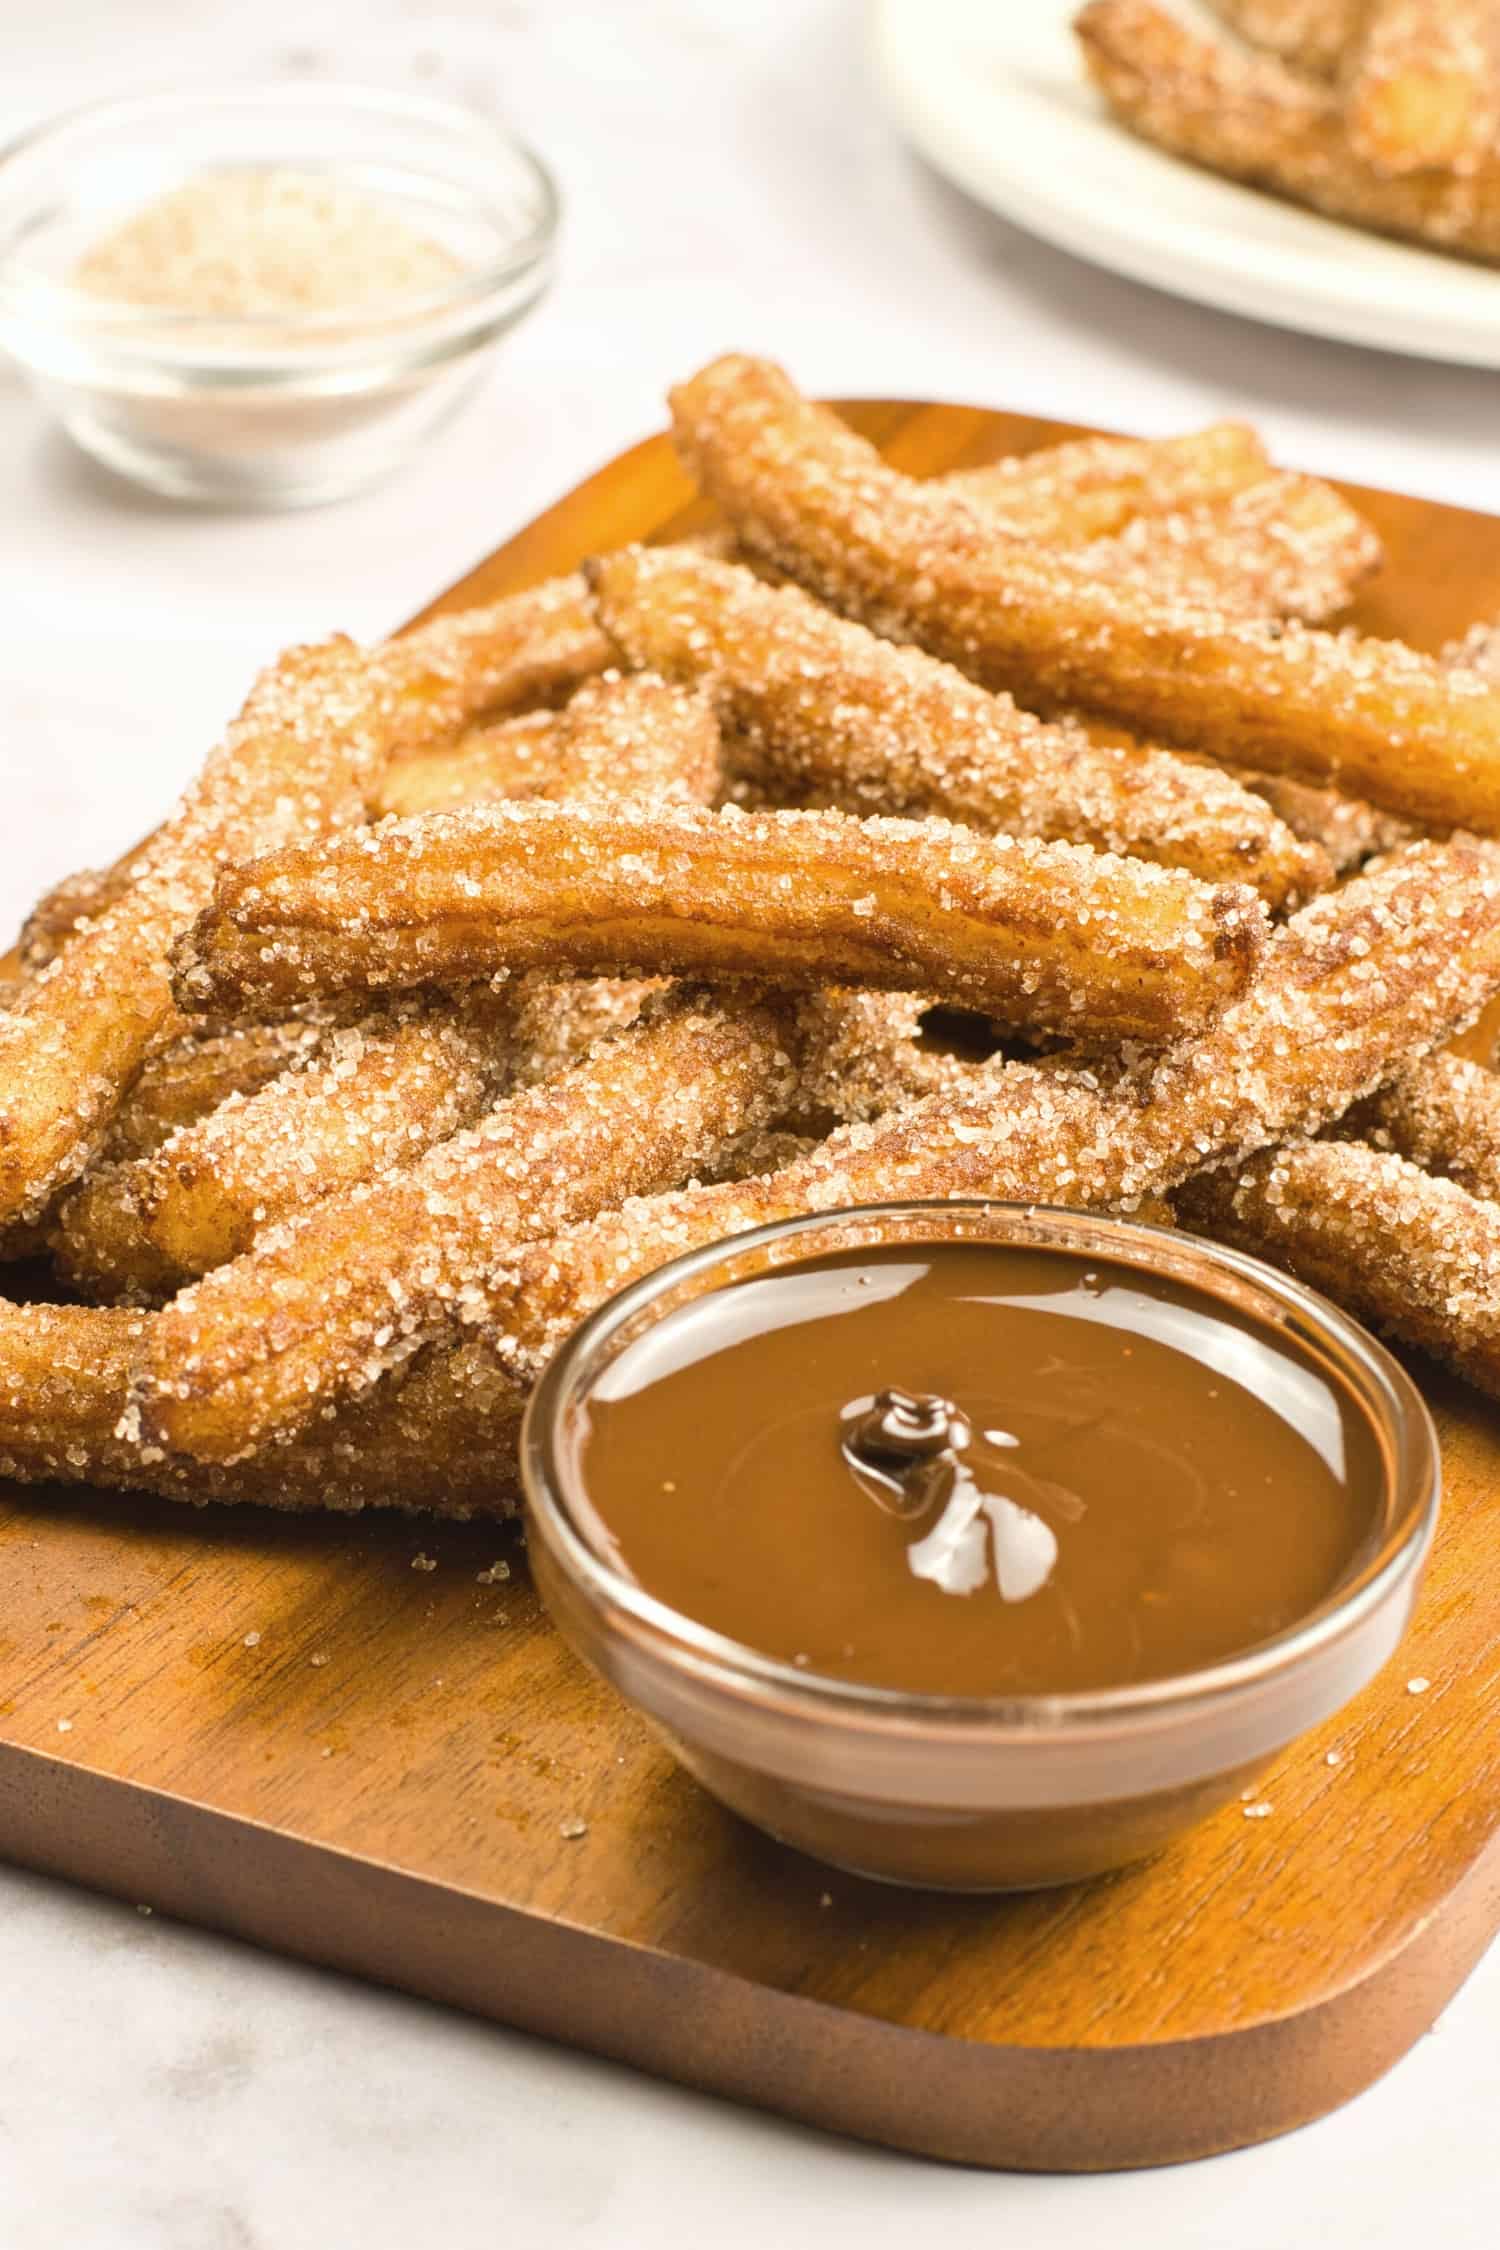 Gluten-free churros and a small bowl of melted chocolate on wooden board.